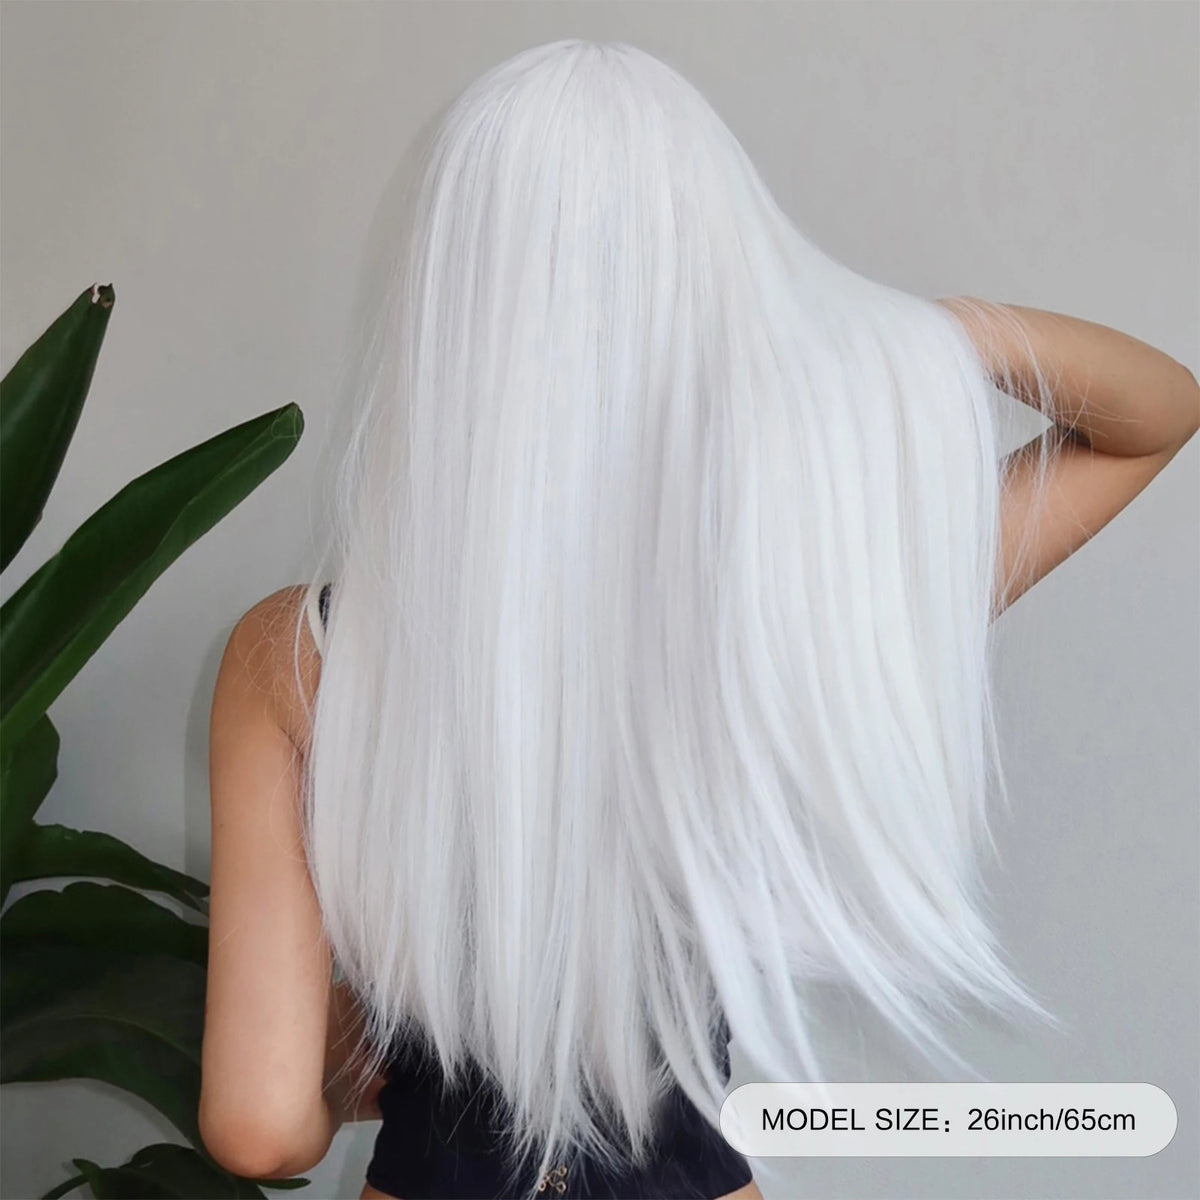 White Long Straight Synthetic Wigs for Women Colorful Cosplay Party Fake Hair with Bangs White Wig HighTemperature